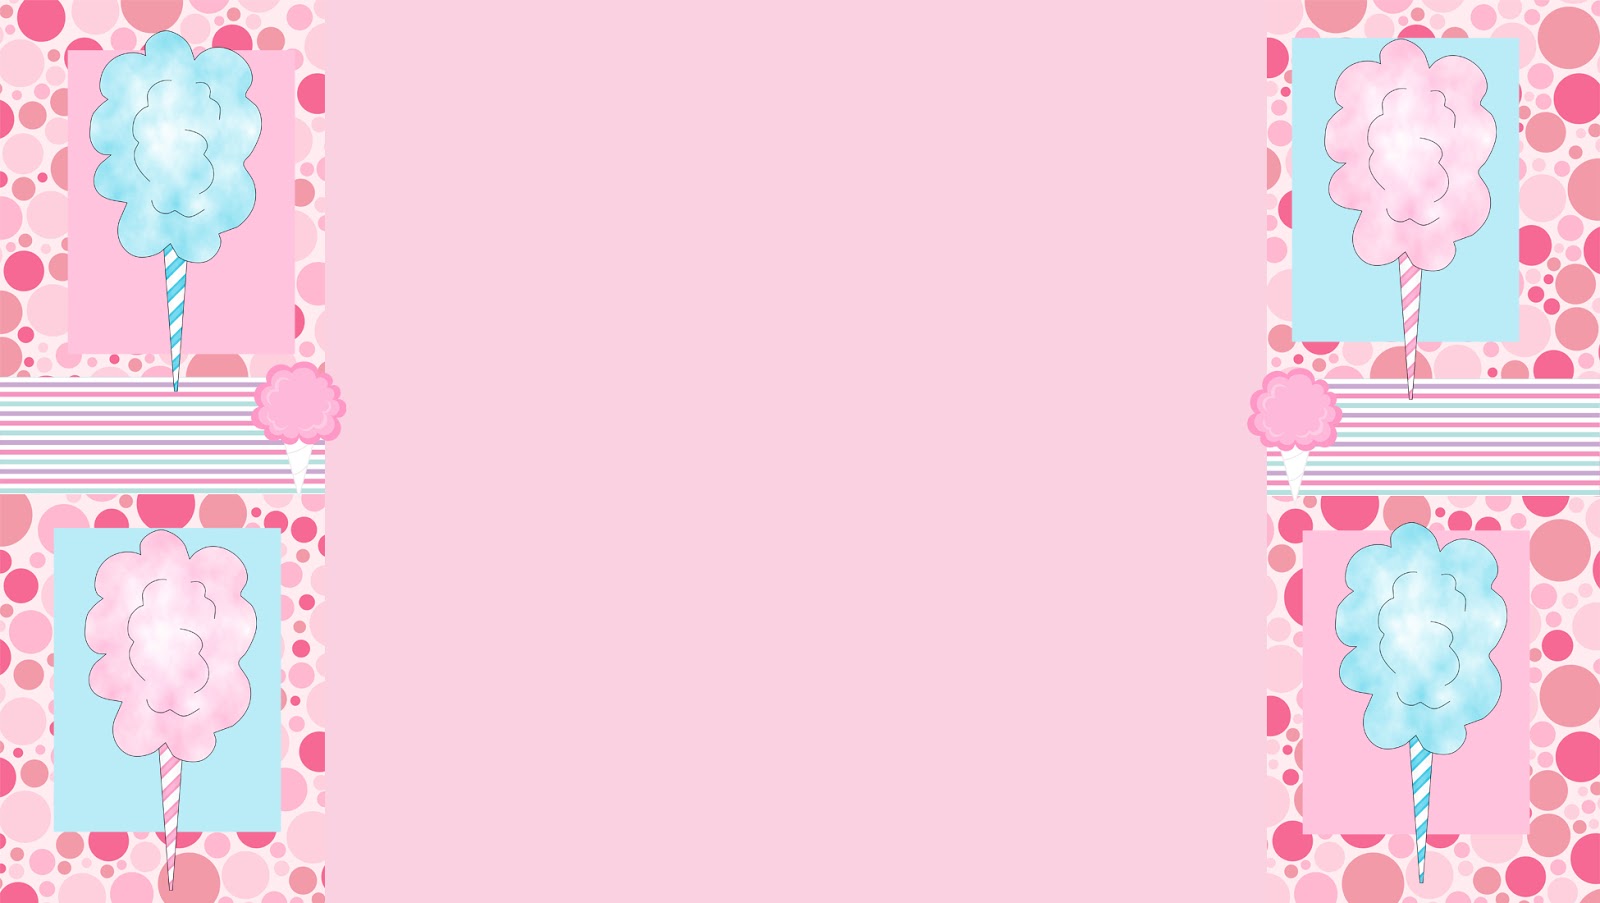 Cotton Candy blog background for today